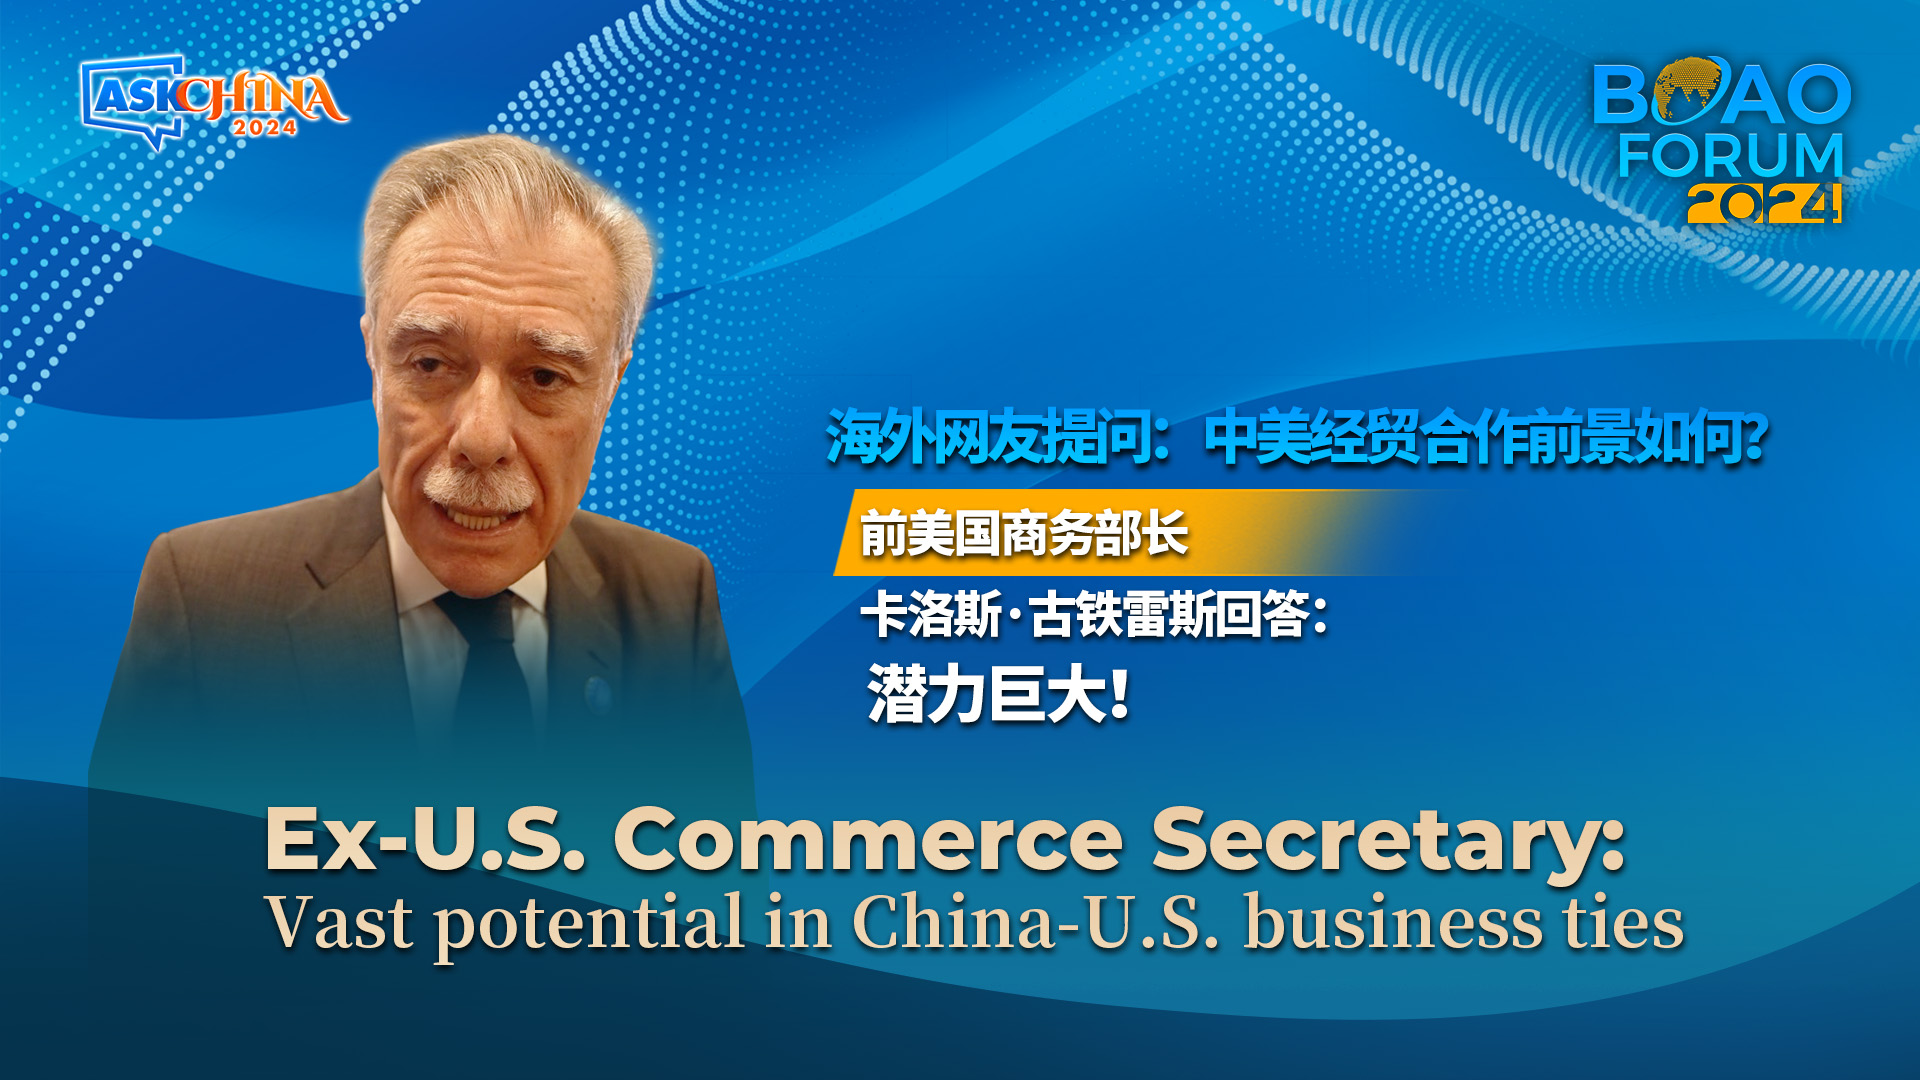 Ex-U.S. commerce secretary: Great potential in China-US business ties